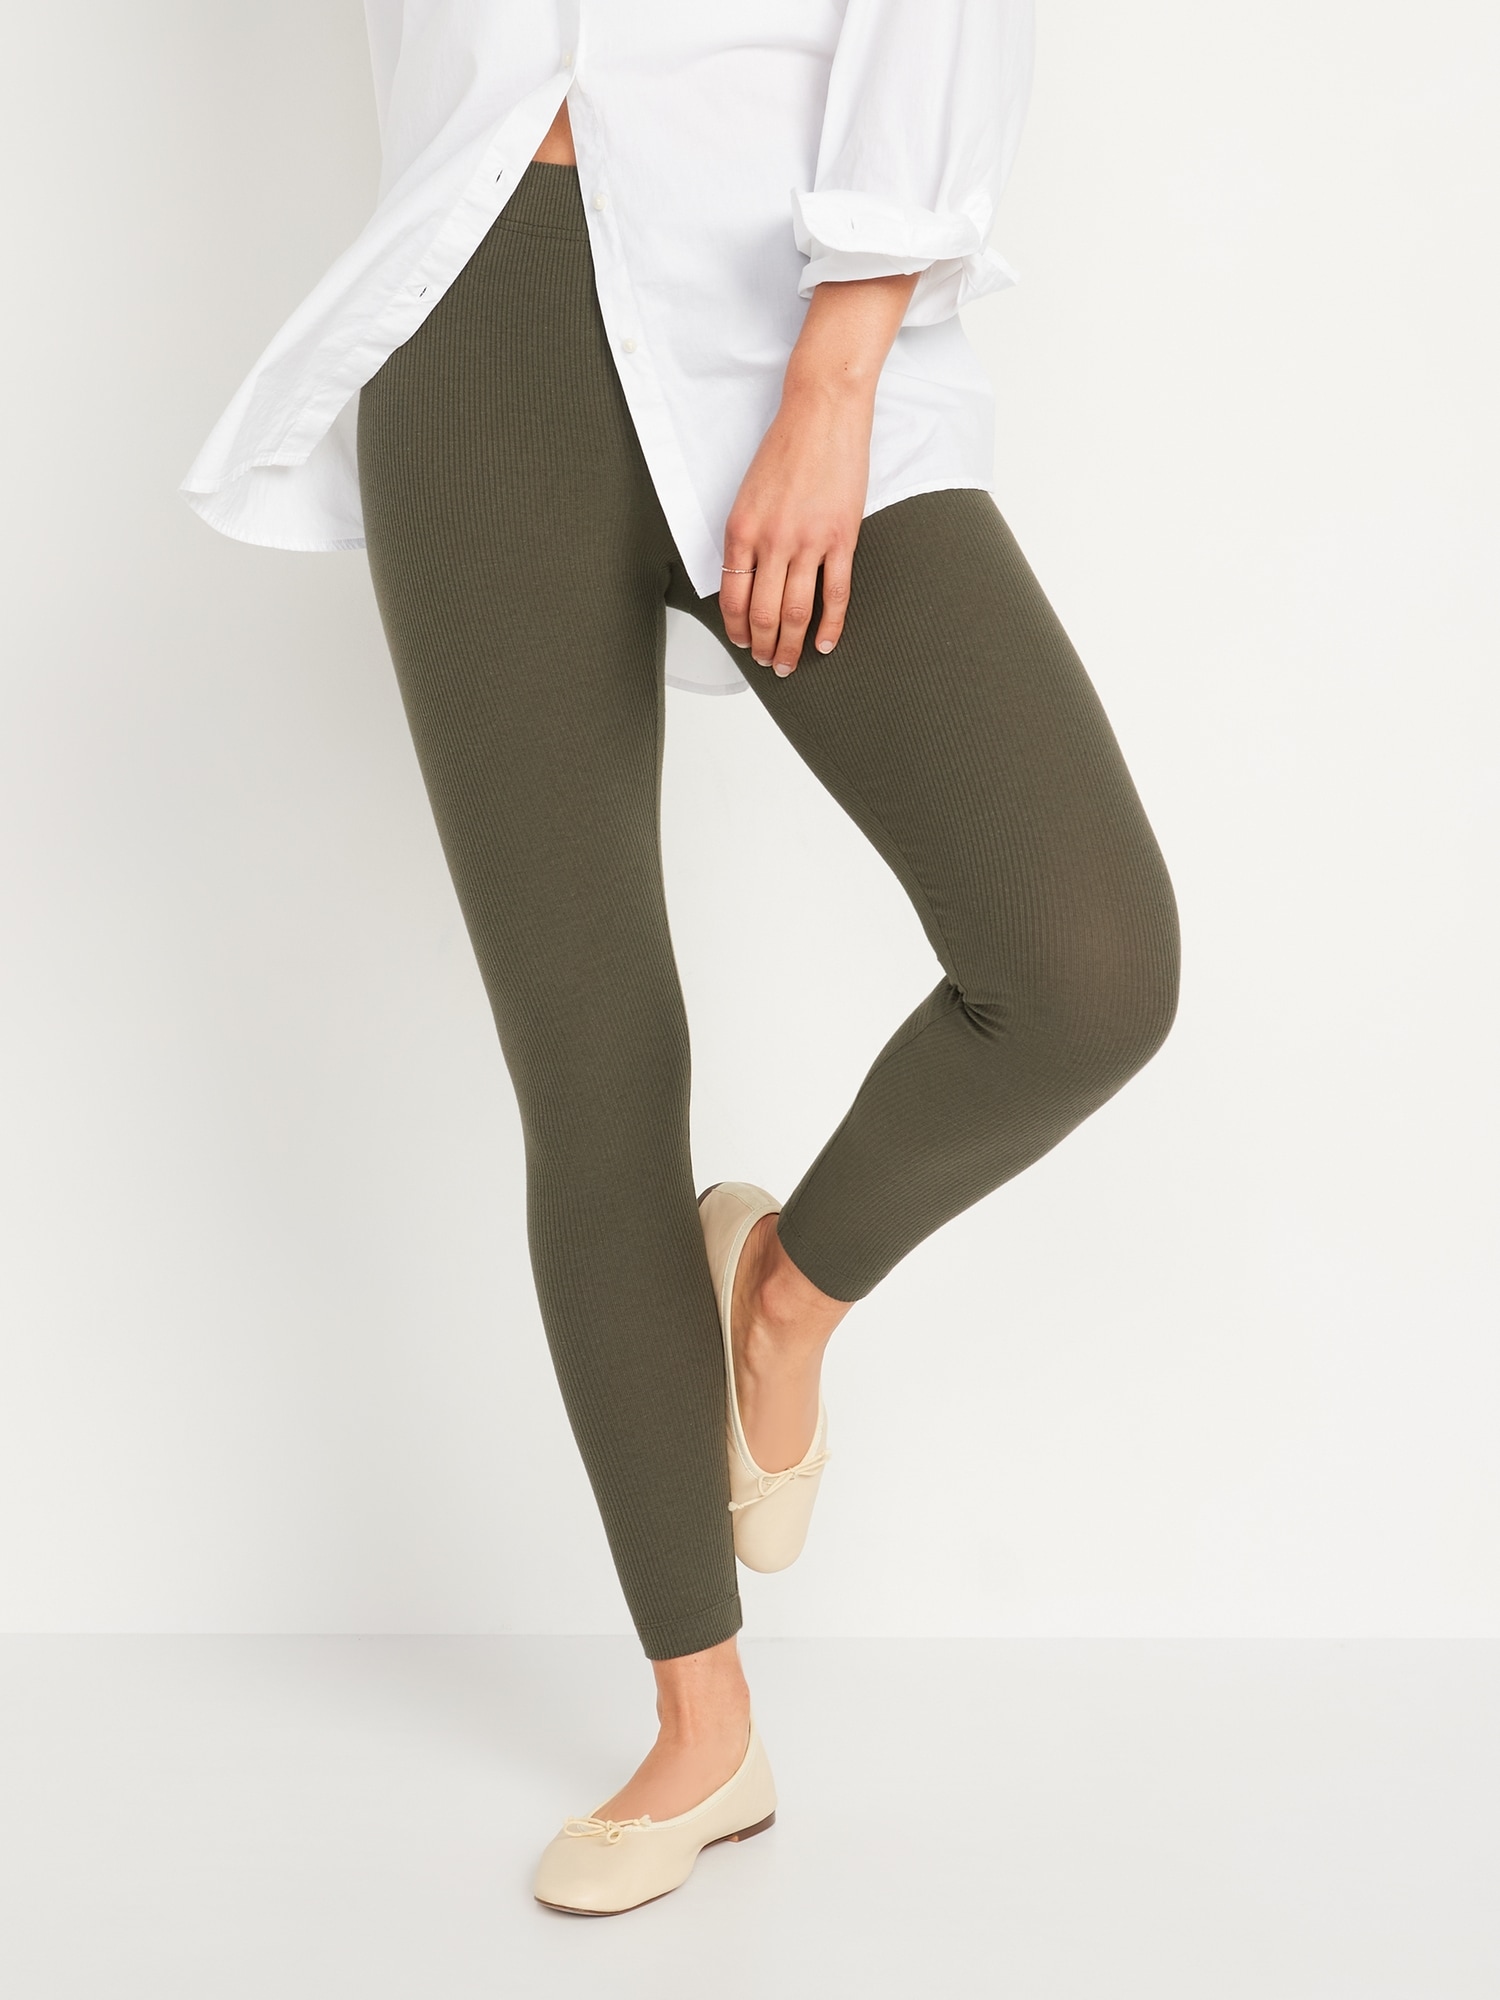 High Waisted Rib-Knit Leggings For Women Old Navy, 41% OFF